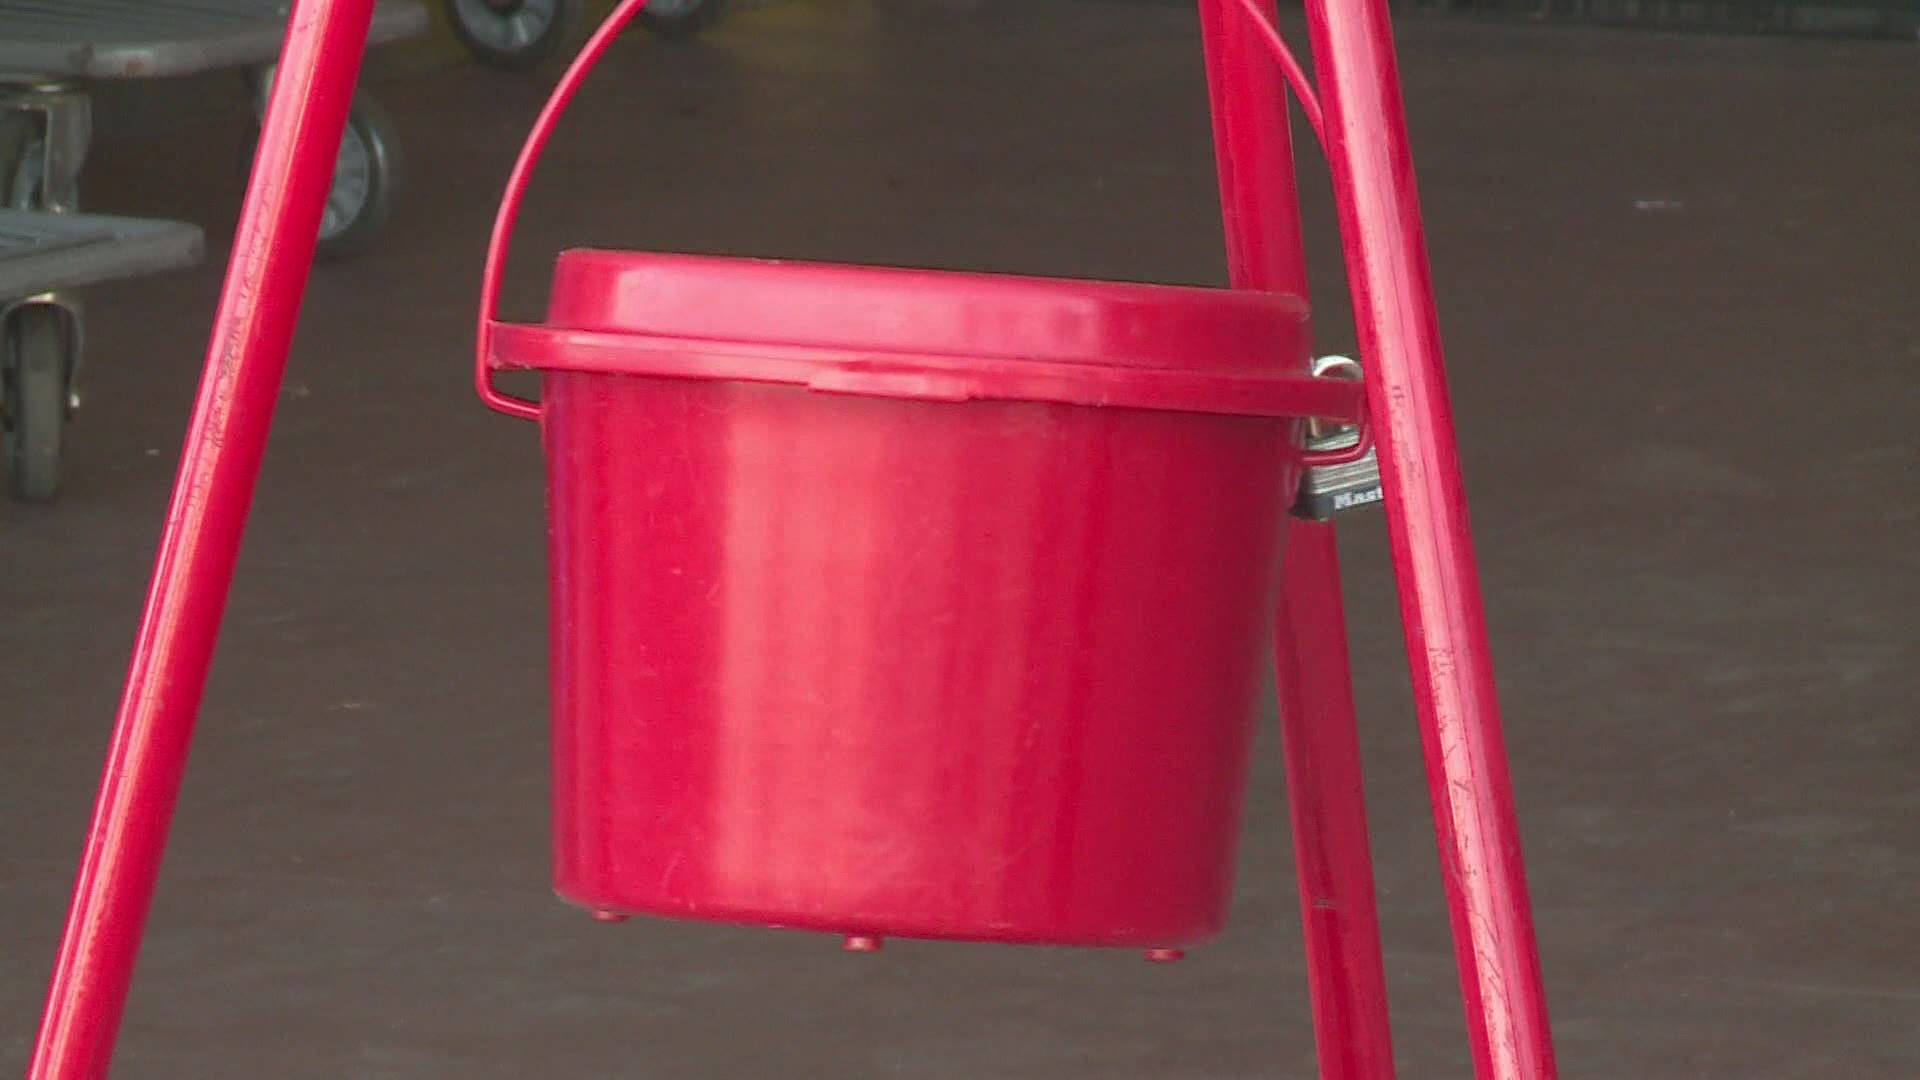 The Salvation Army says due to the pandemic -- it expects to serve up to 155% more people this year, while also expecting a 50% drop in fundraising.